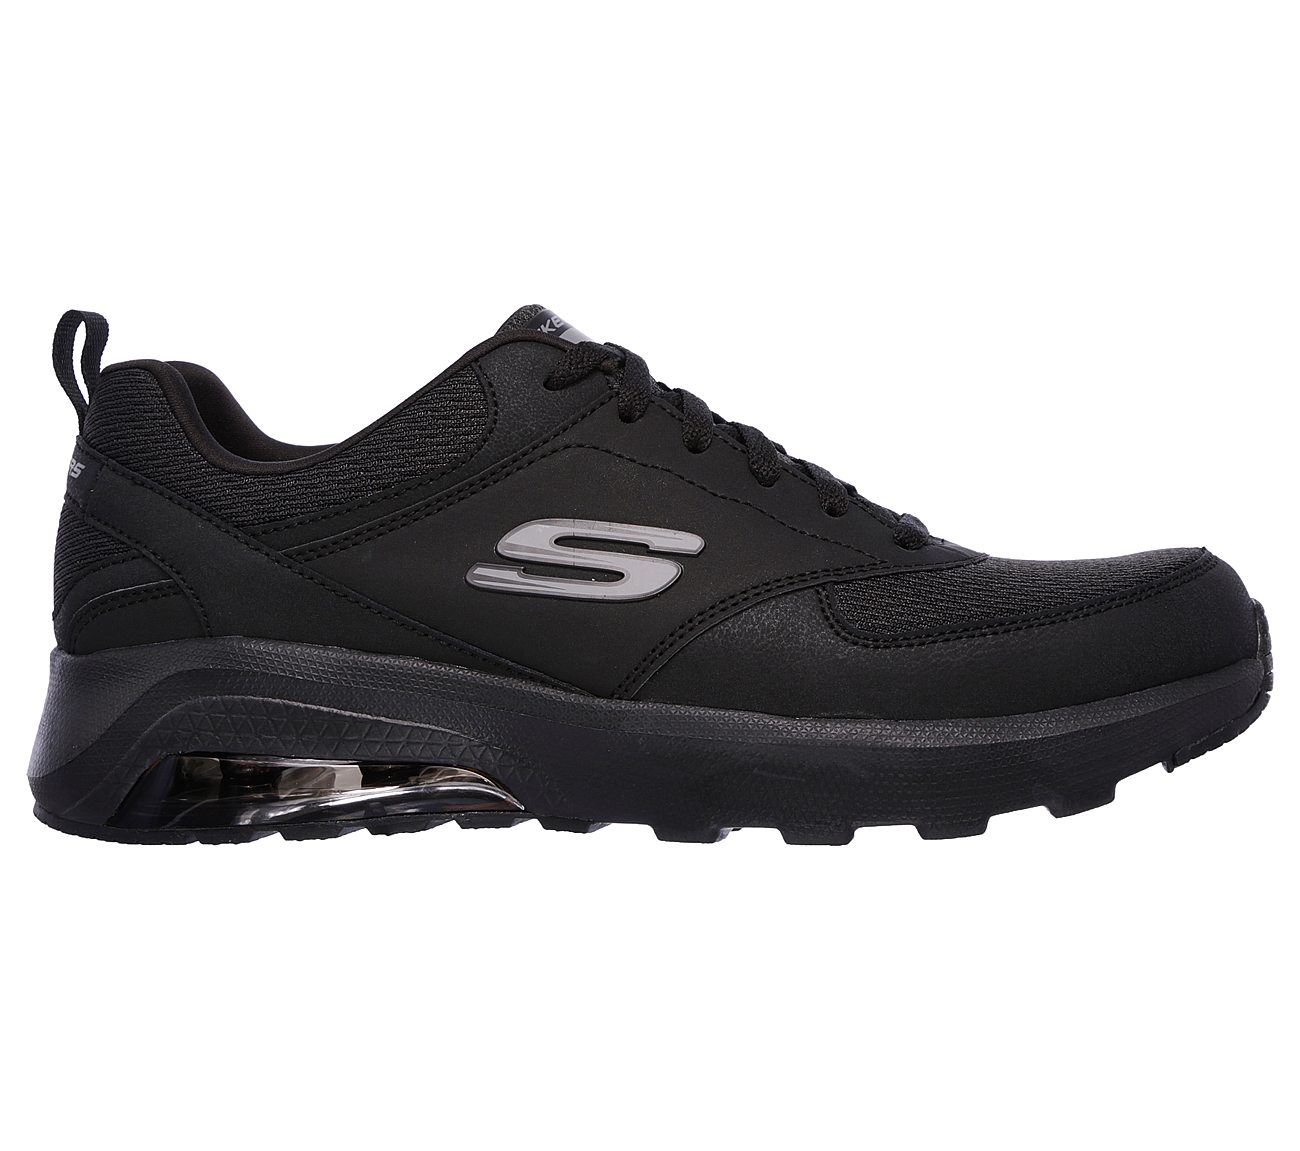 Buy SKECHERS Skech-Air Extreme - Wichess Skech-Air Shoes